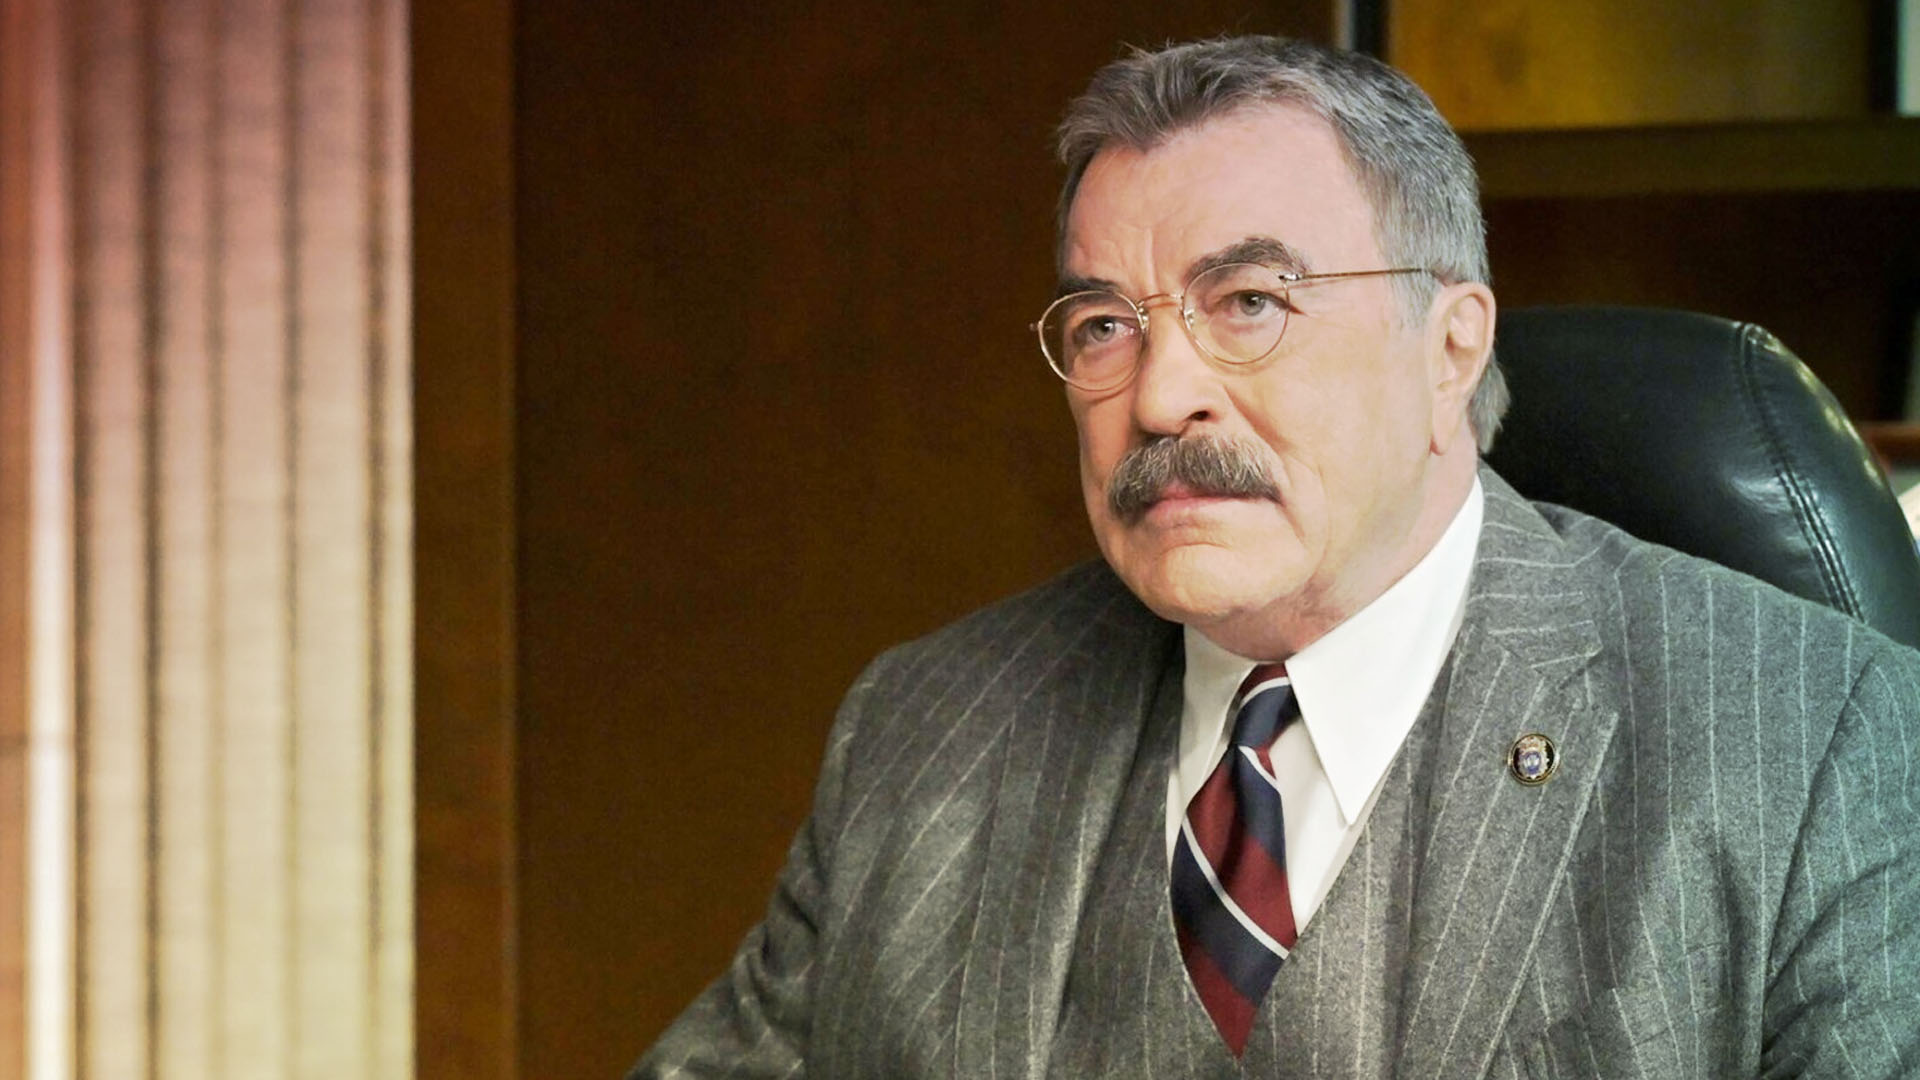 Blue Bloods Season 13 Part 2: Is It Coming In January 2023?